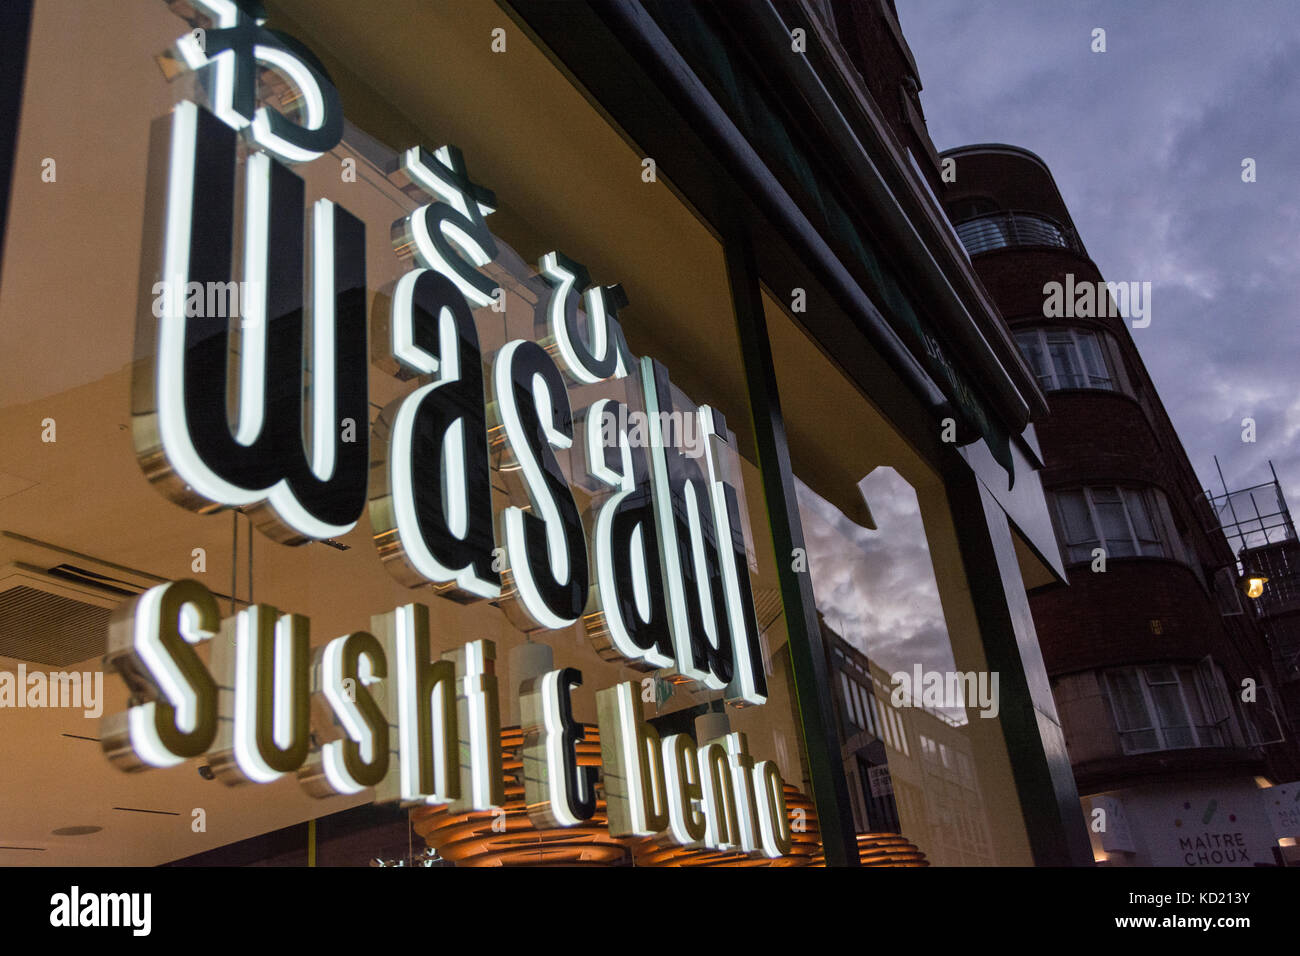 Wasabi fast food restaurant chain Sushi and Bento shop front in Soho, London, UK Stock Photo